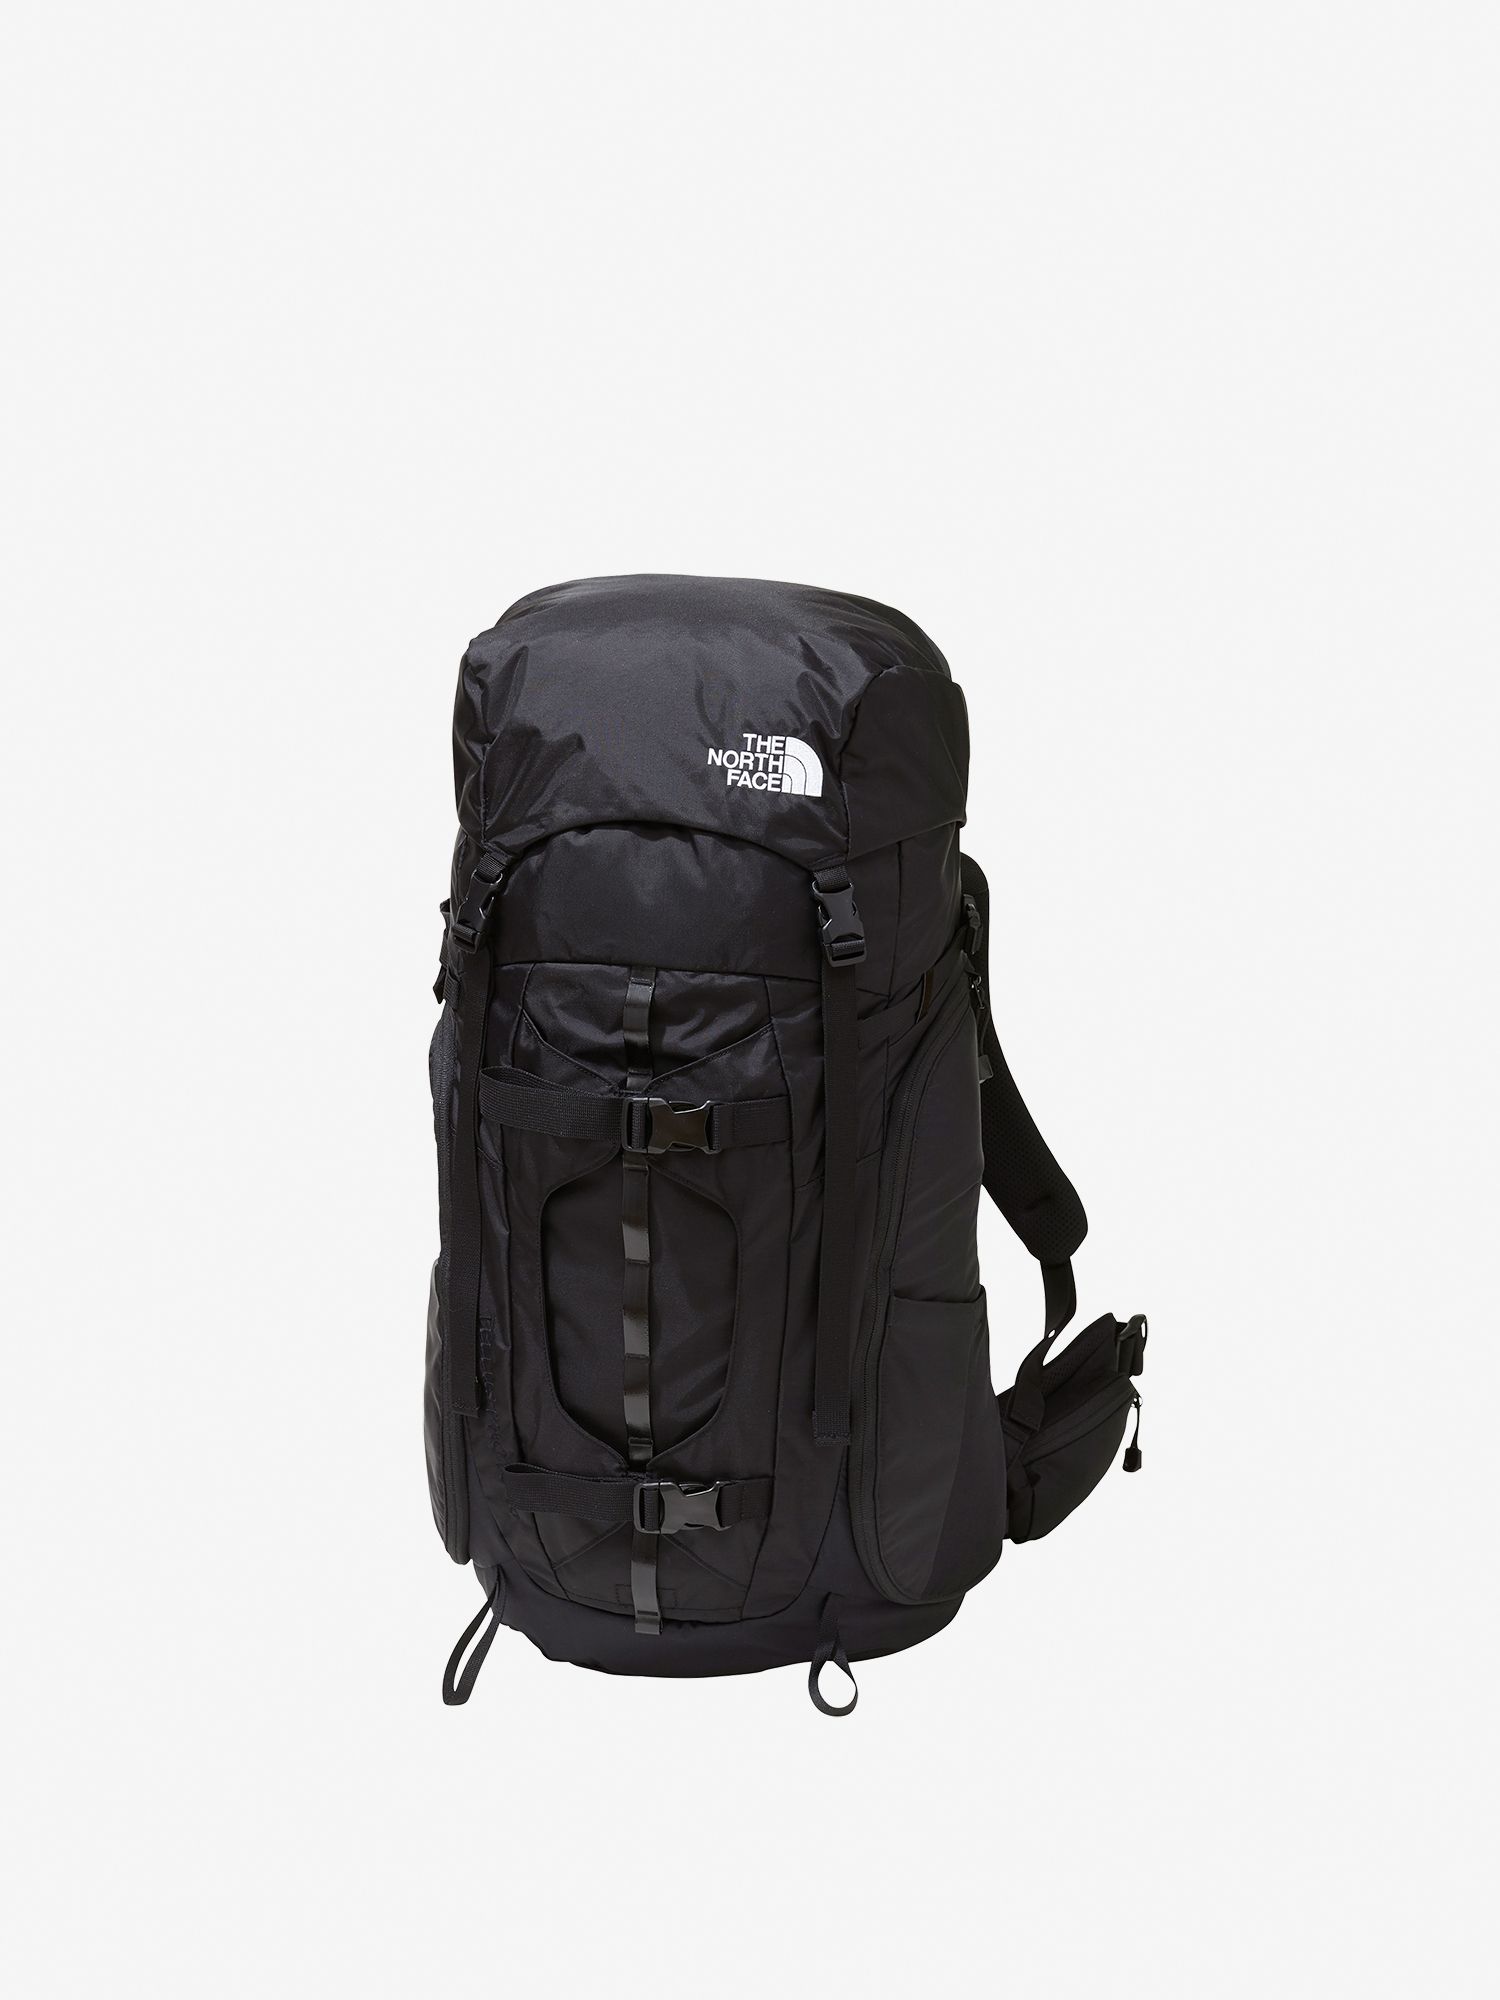 THE NORTH FACE TELLUS PHOTO 40テルスフォト - businessofferview3